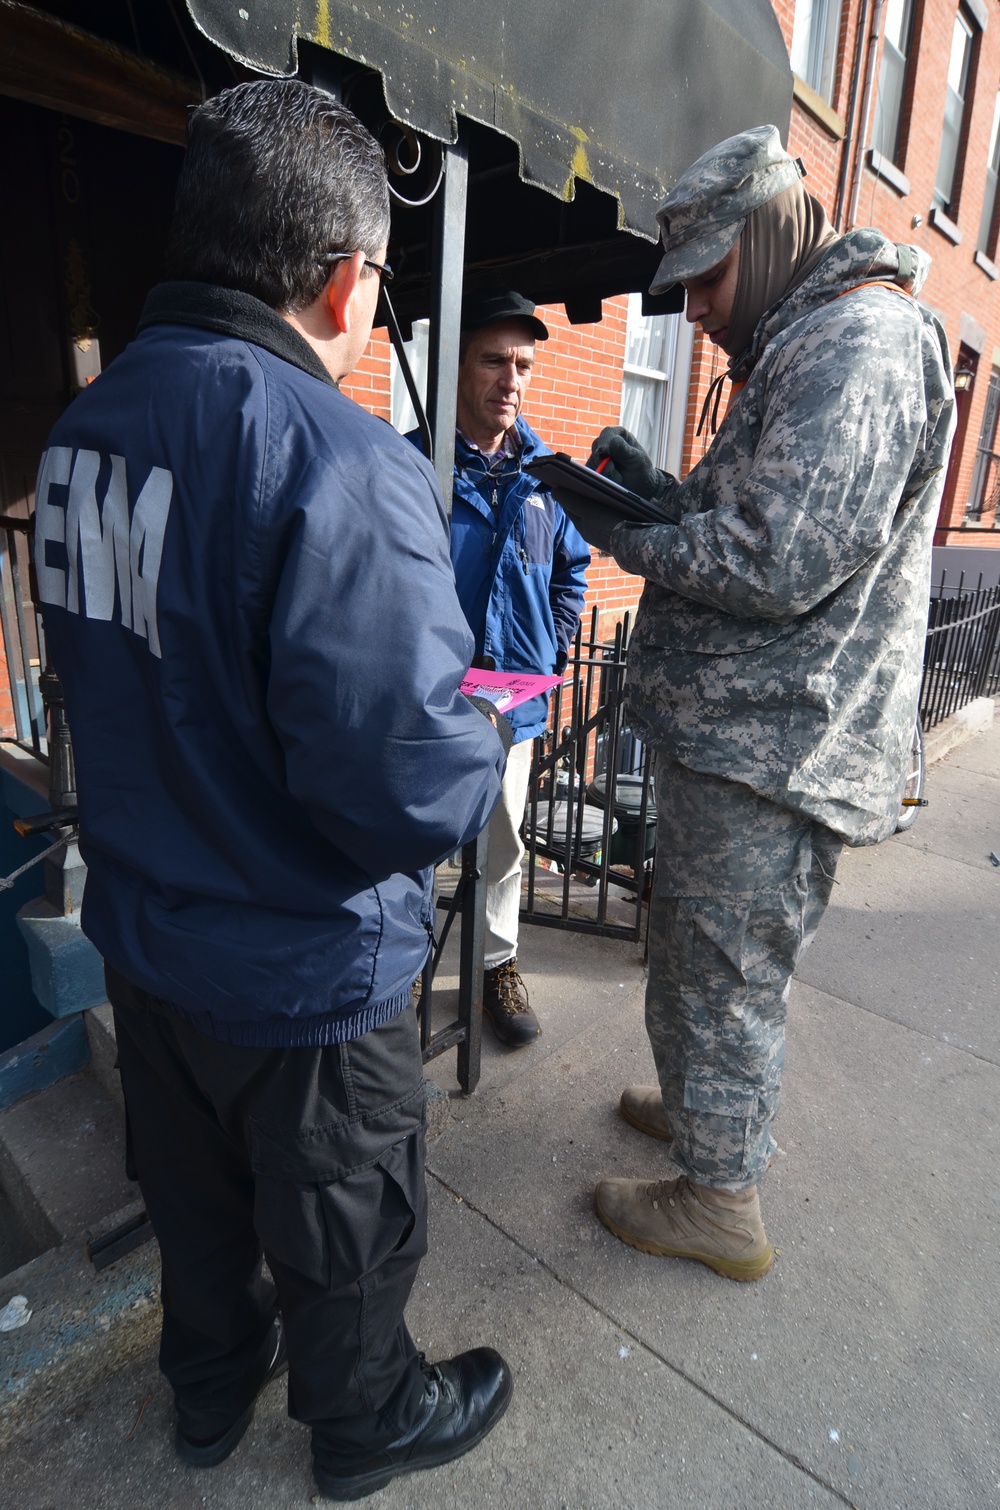 New York National Guard assists in Hurricane Sandy recovery